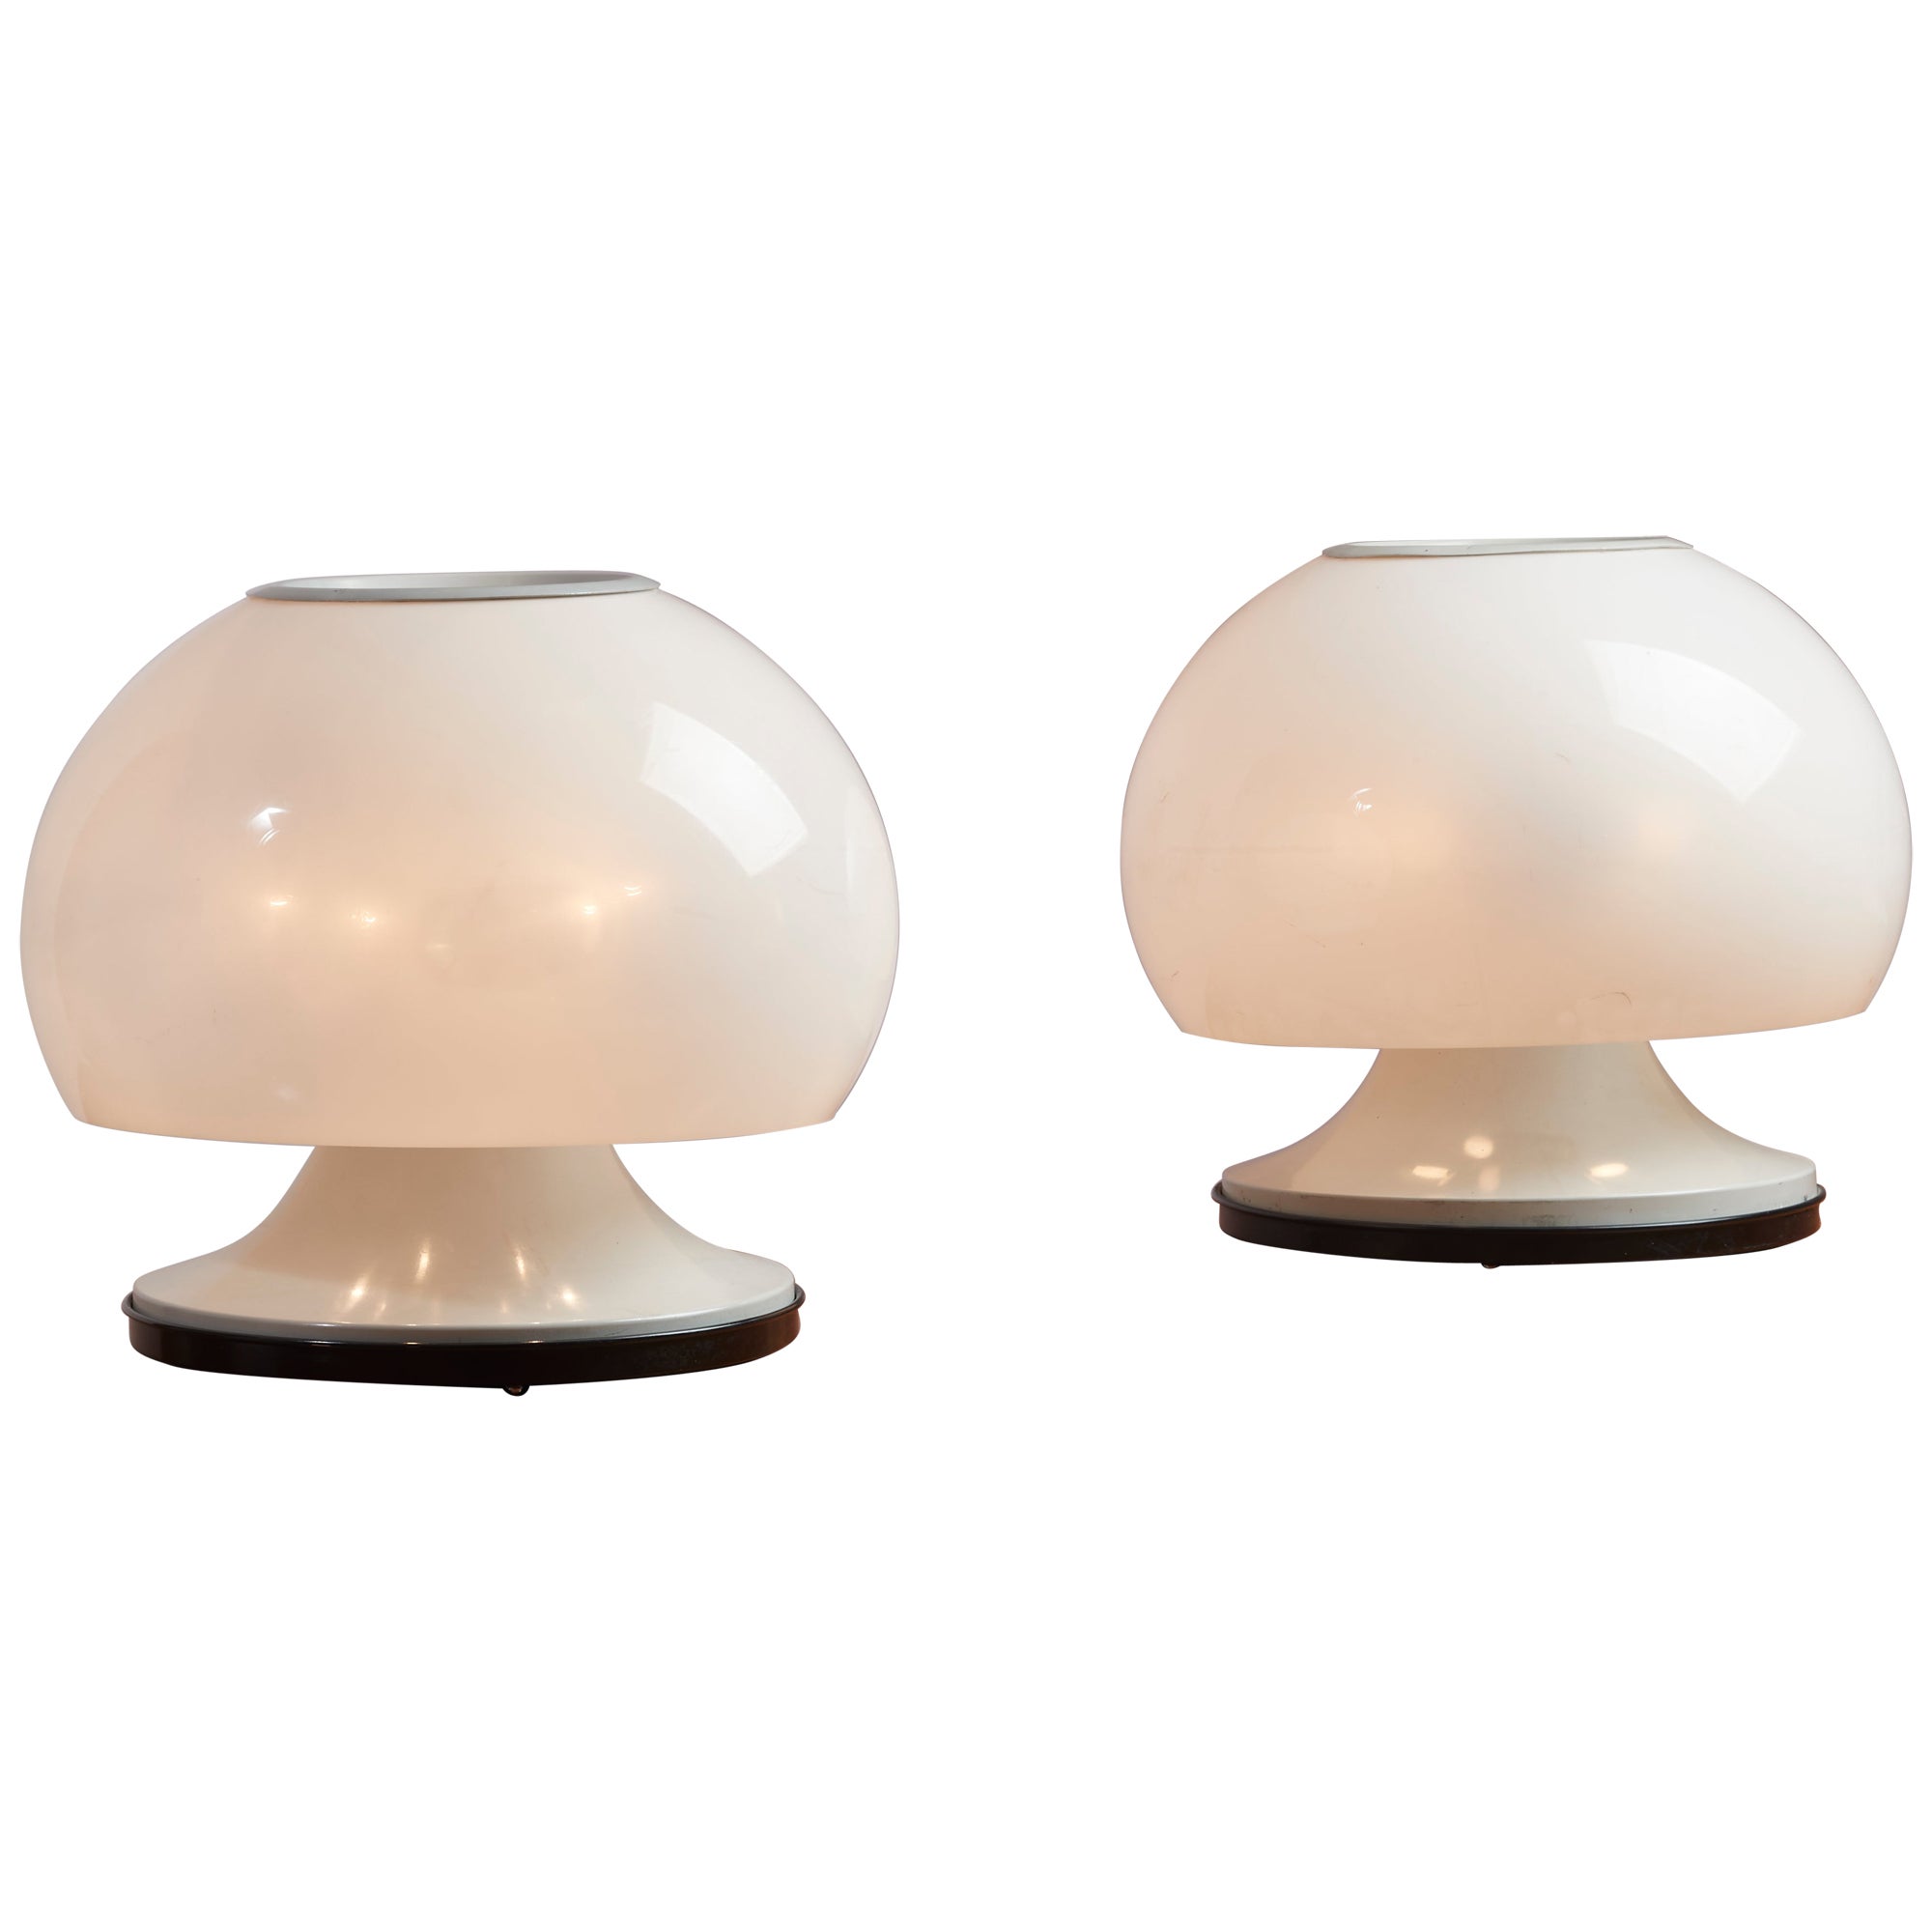 Gino Sarfatti pair of perspex Table lamps Model 596, Arteluce, Italy, 1968 For Sale